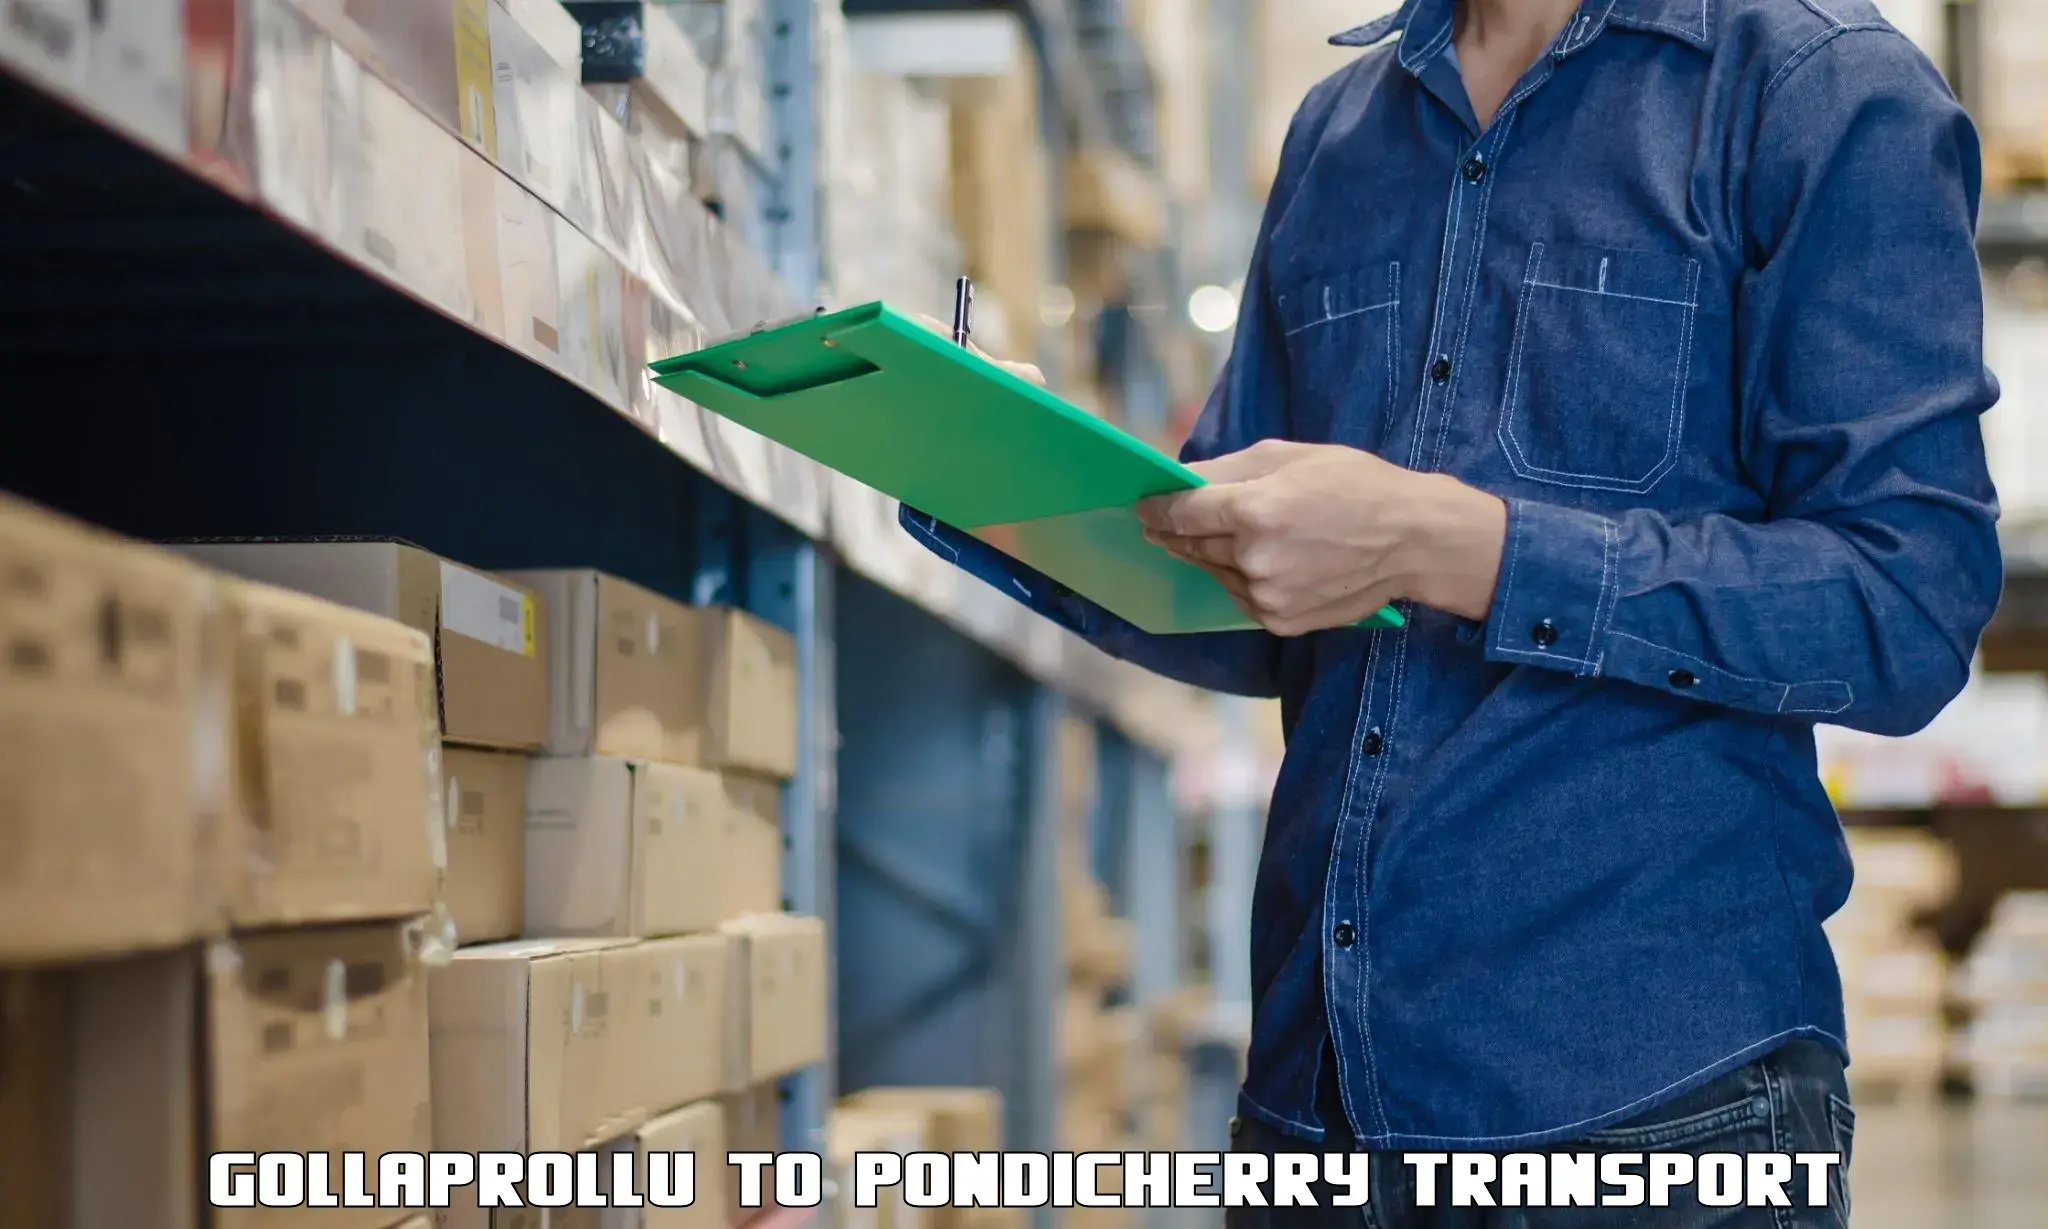 Package delivery services Gollaprollu to Pondicherry